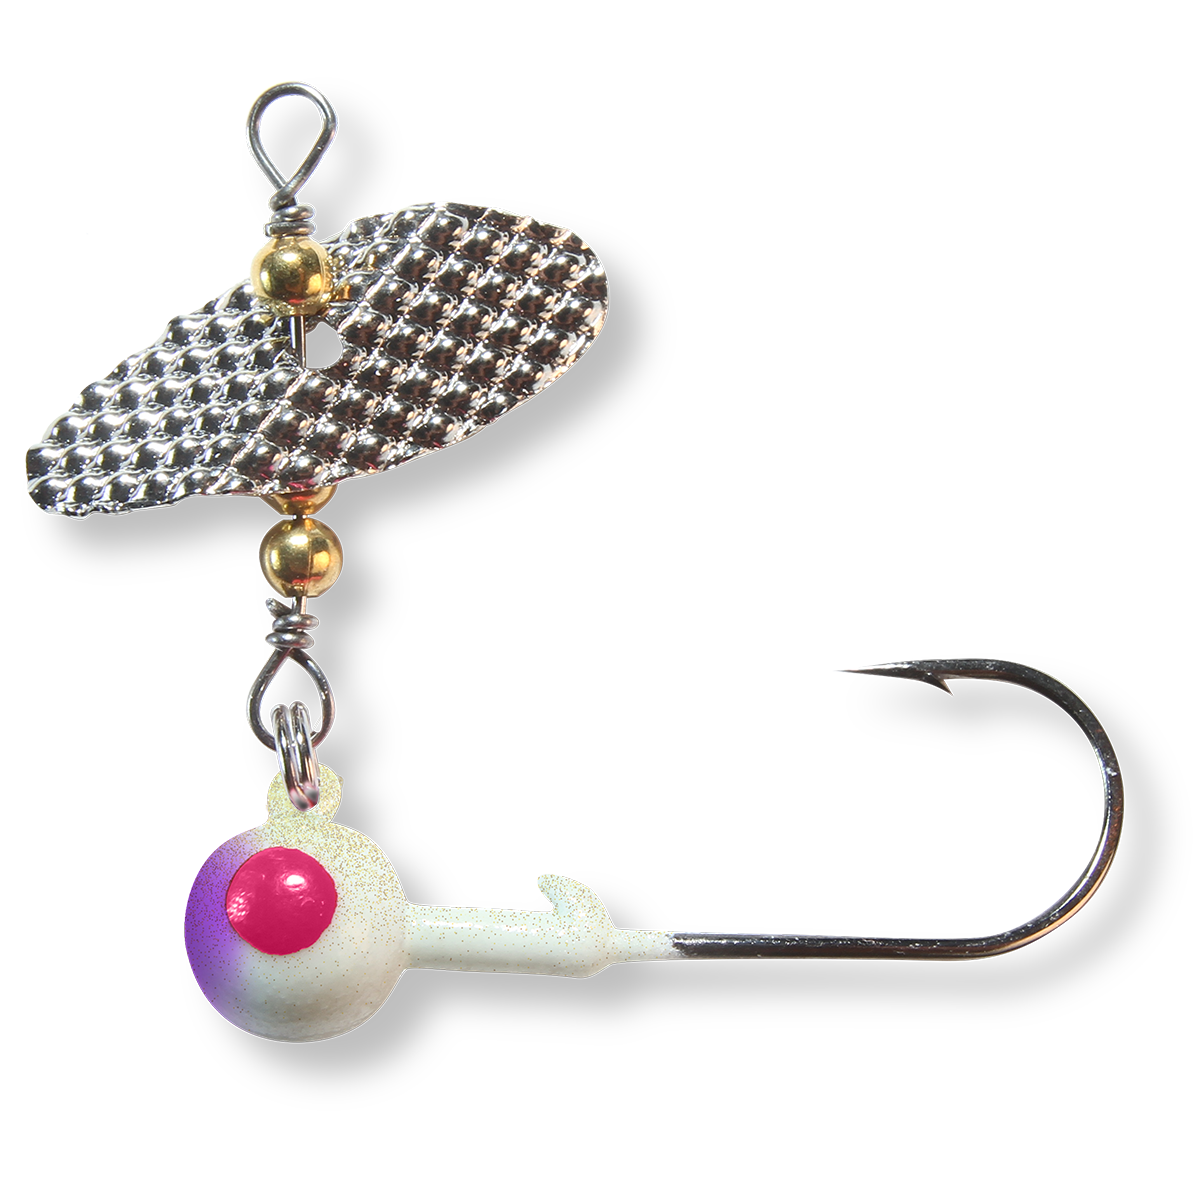 Spin A Jig by Pk Lures Yellow Purple Glow / 1/8 oz